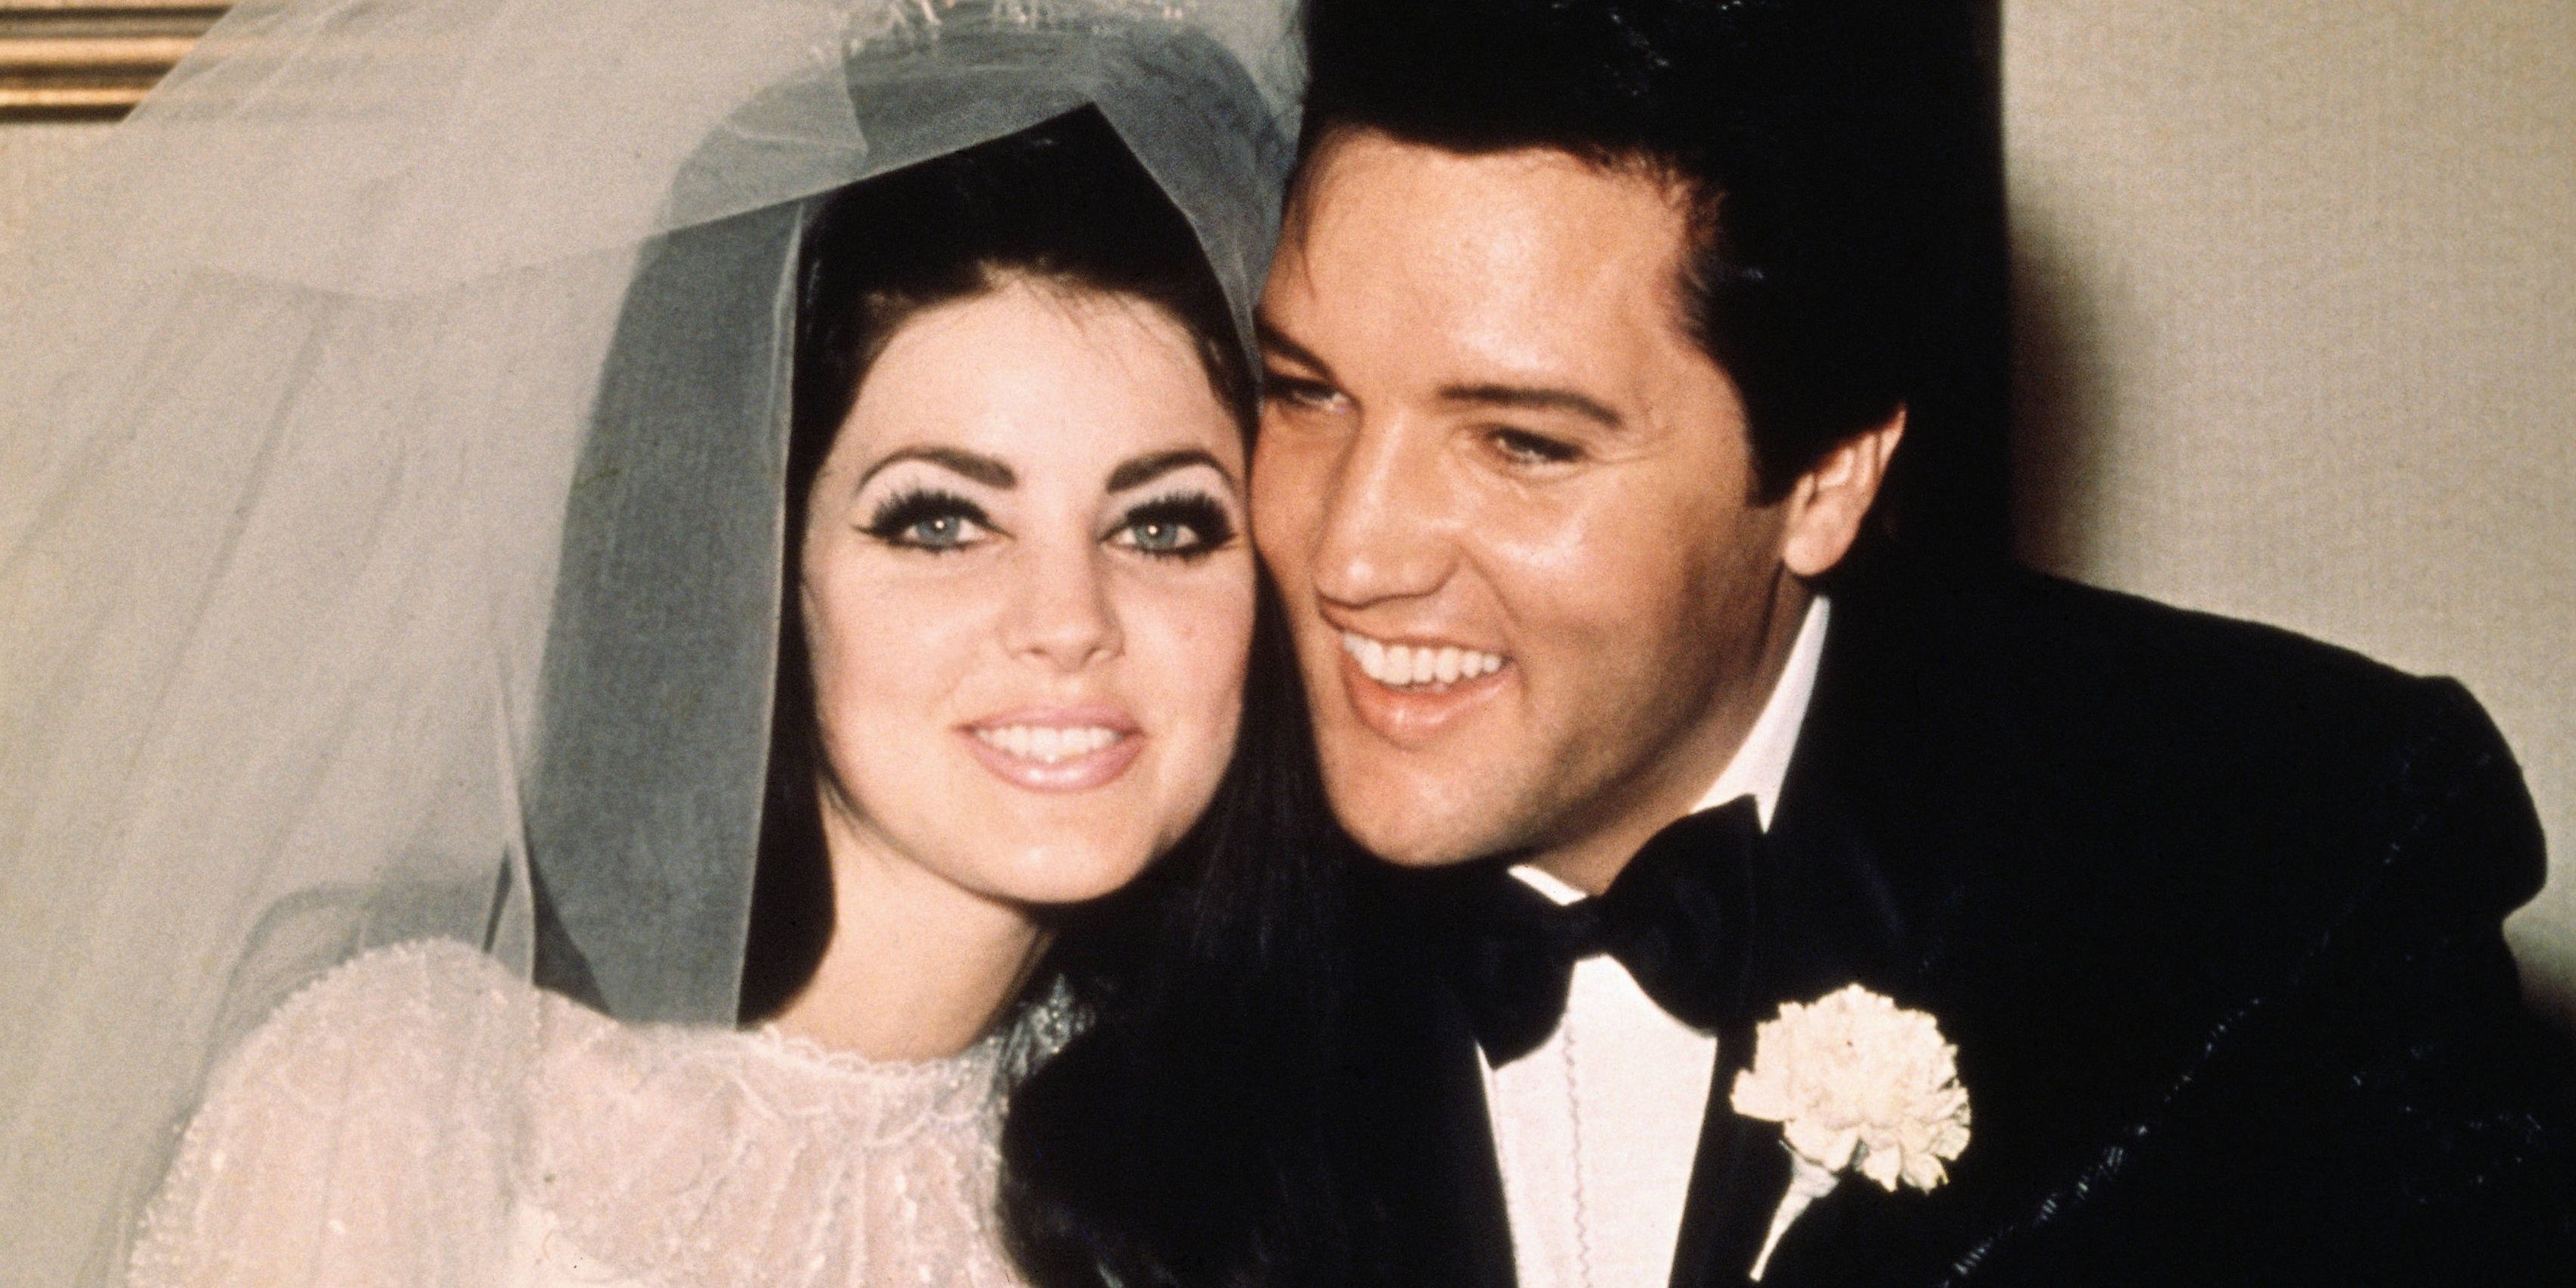 Priscilla Presley and Elvis Presley sitting next to each other in a wedding photograph 